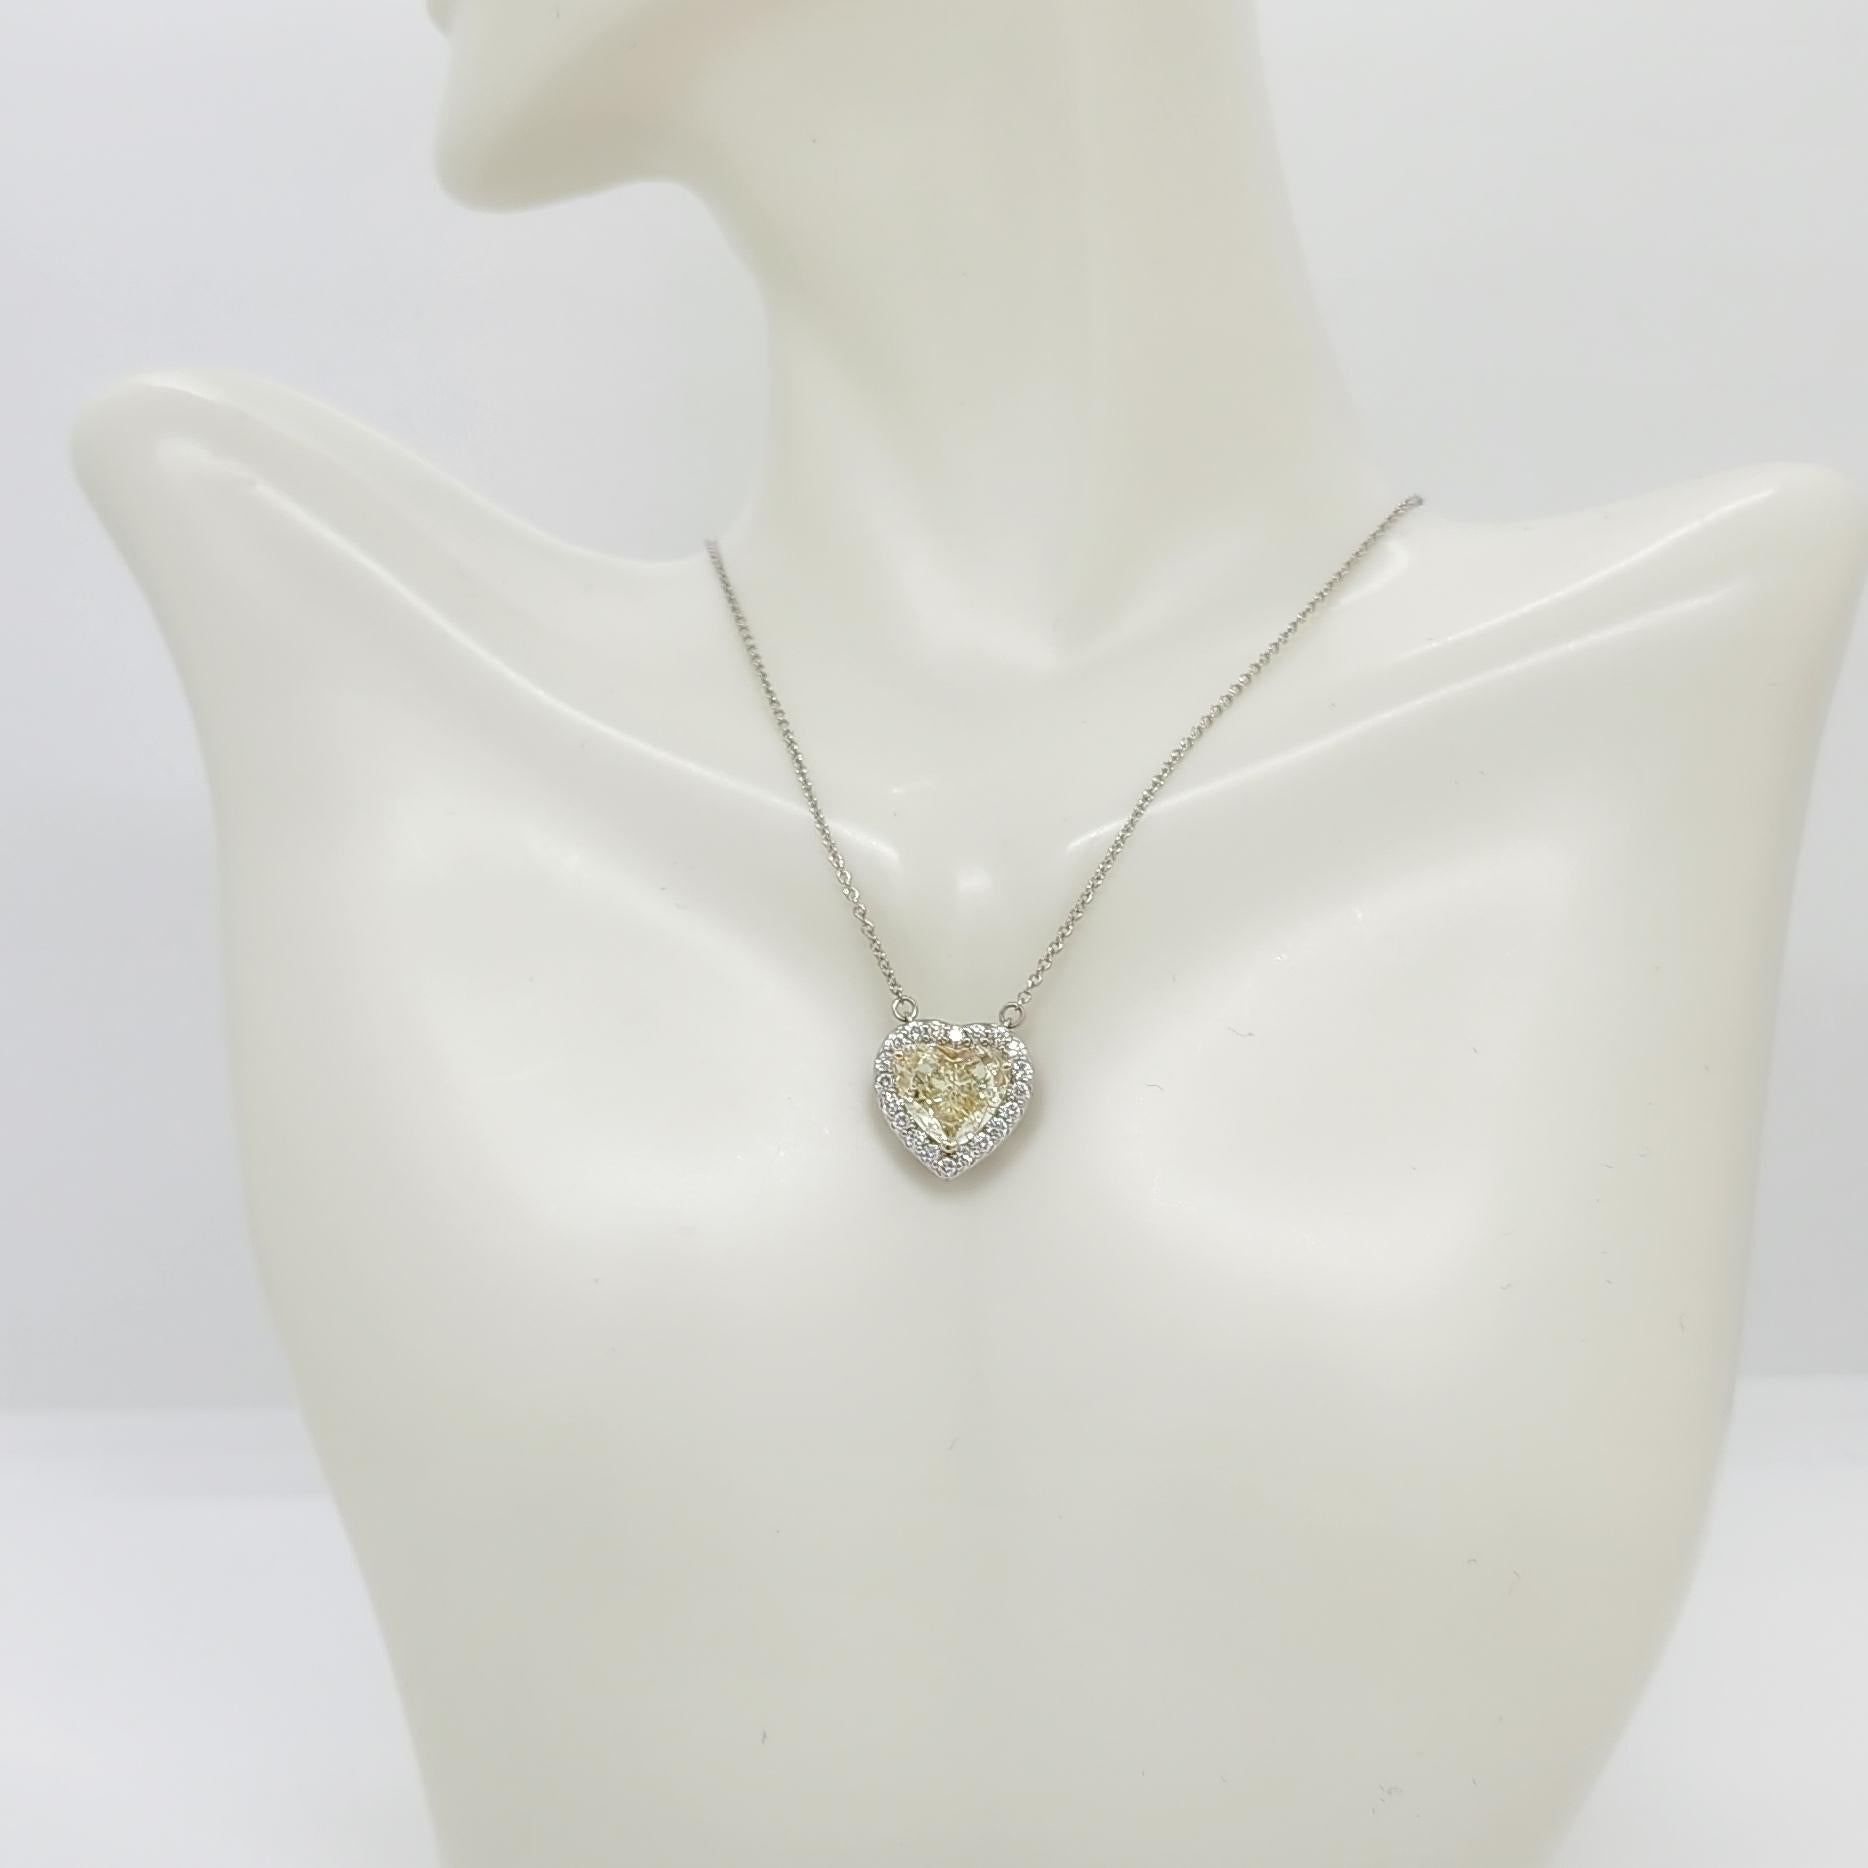 Gorgeous 2.67 ct. yellow diamond heart shape with 0.40 ct. white diamond rounds. Handmade in 18k yellow and white gold.